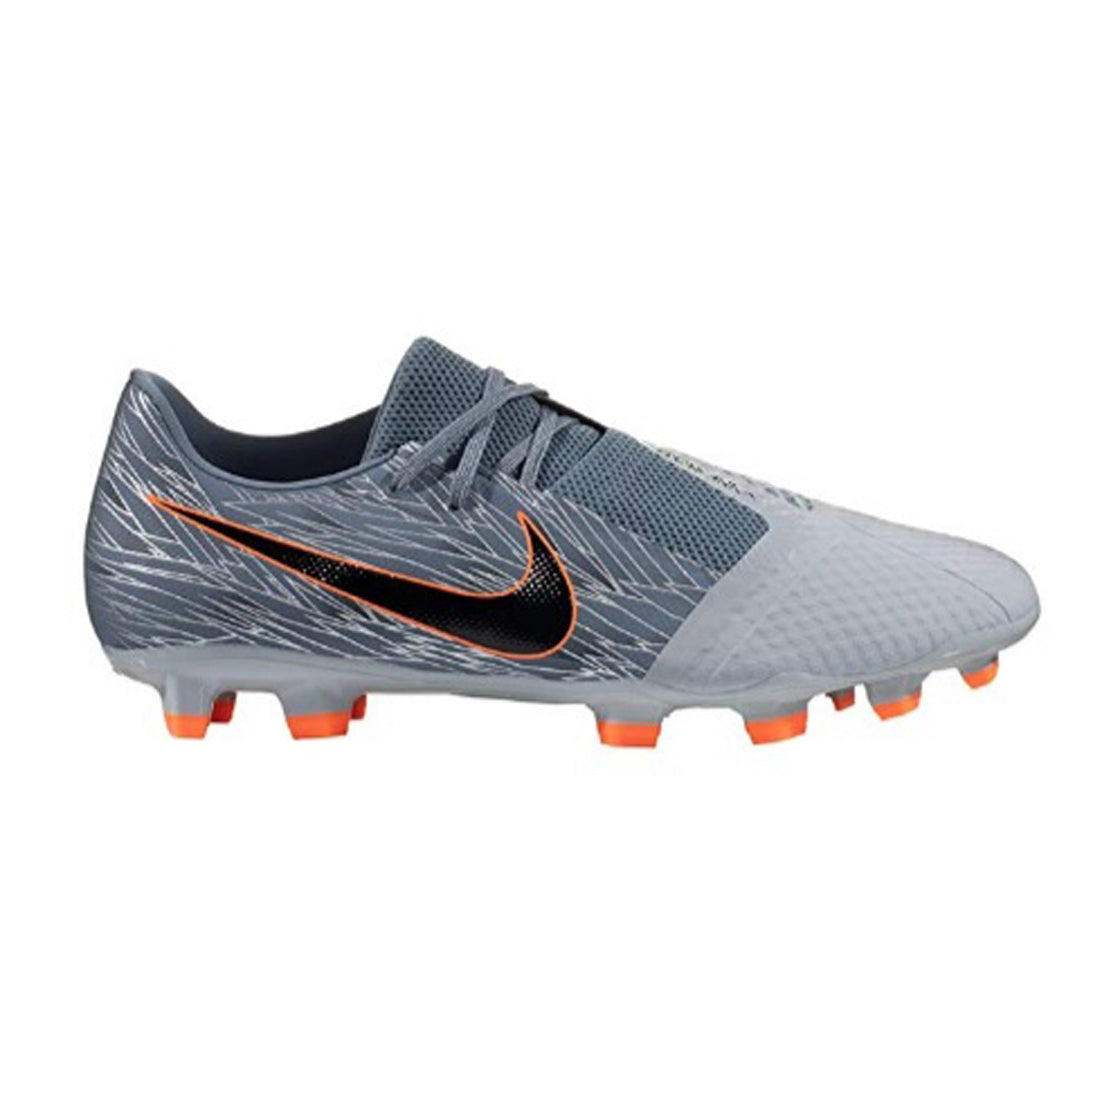 Adults Venom Elite Football Boots Firm Ground Pro Direct .